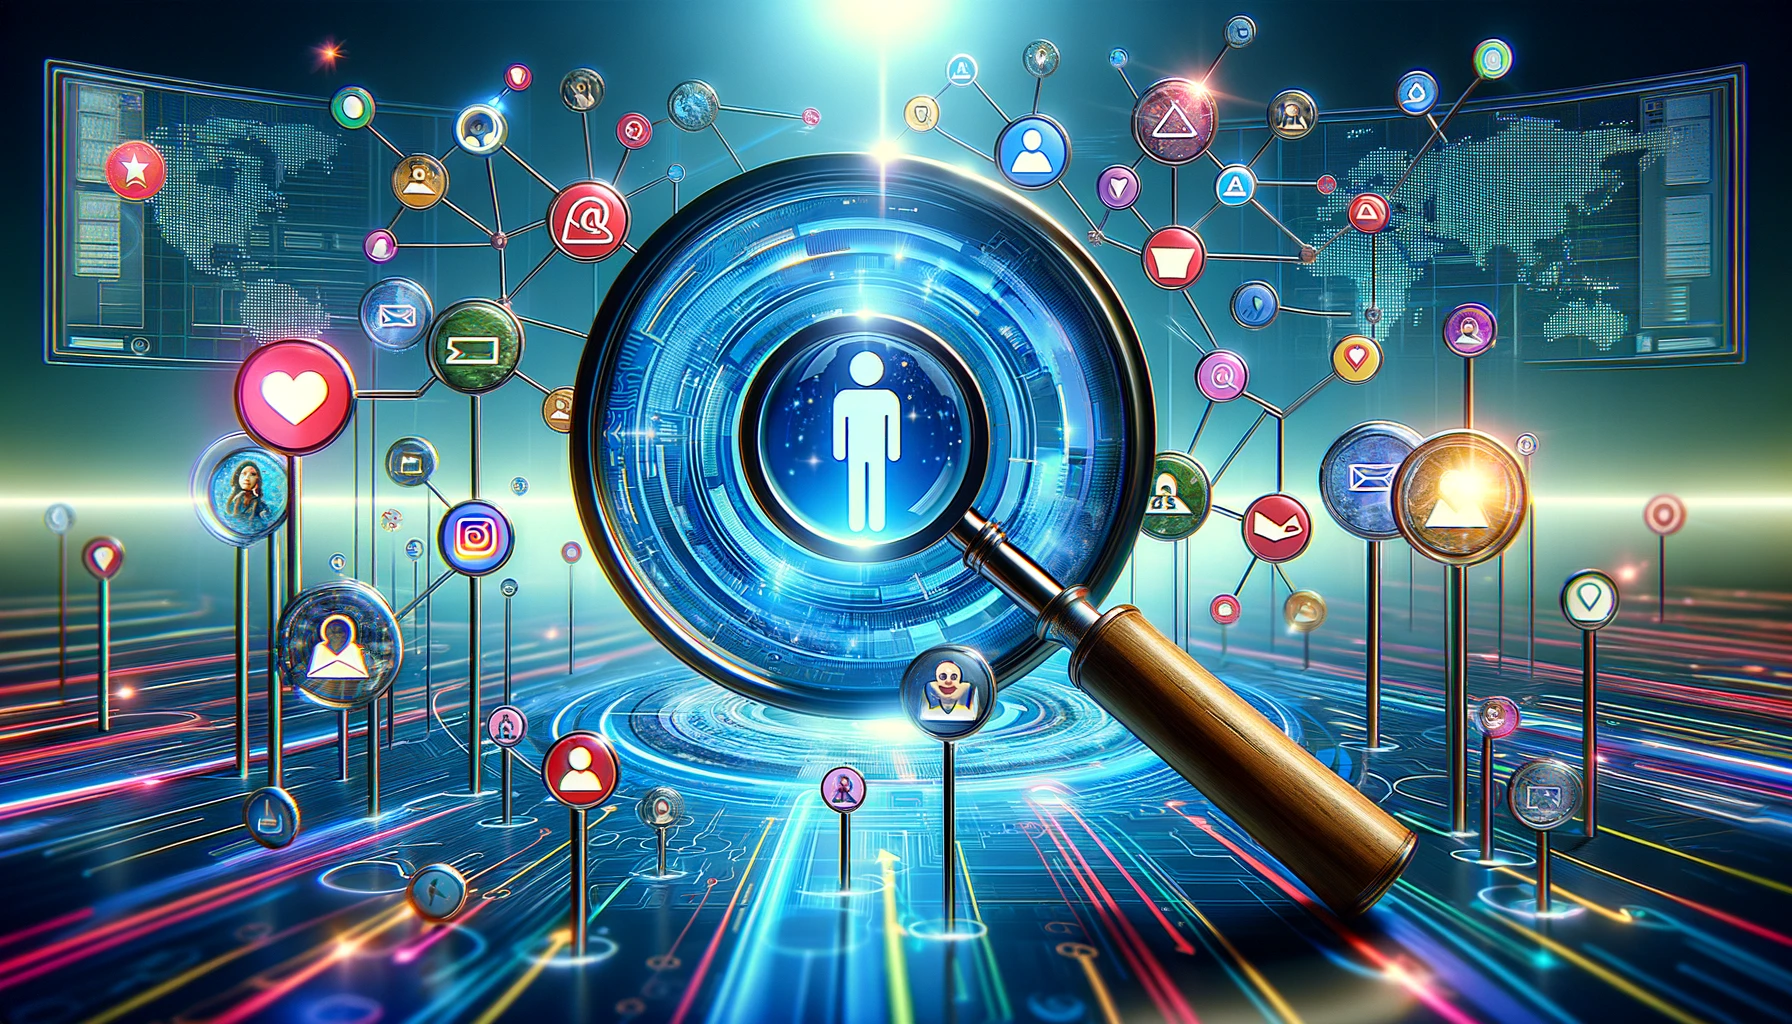 A vivid representation of 'Digital Lead Generation' highlighting a network of digital platforms and a user avatar under a magnifying glass, symbolizing precise audience targeting and engagement within a vibrant digital ecosystem.